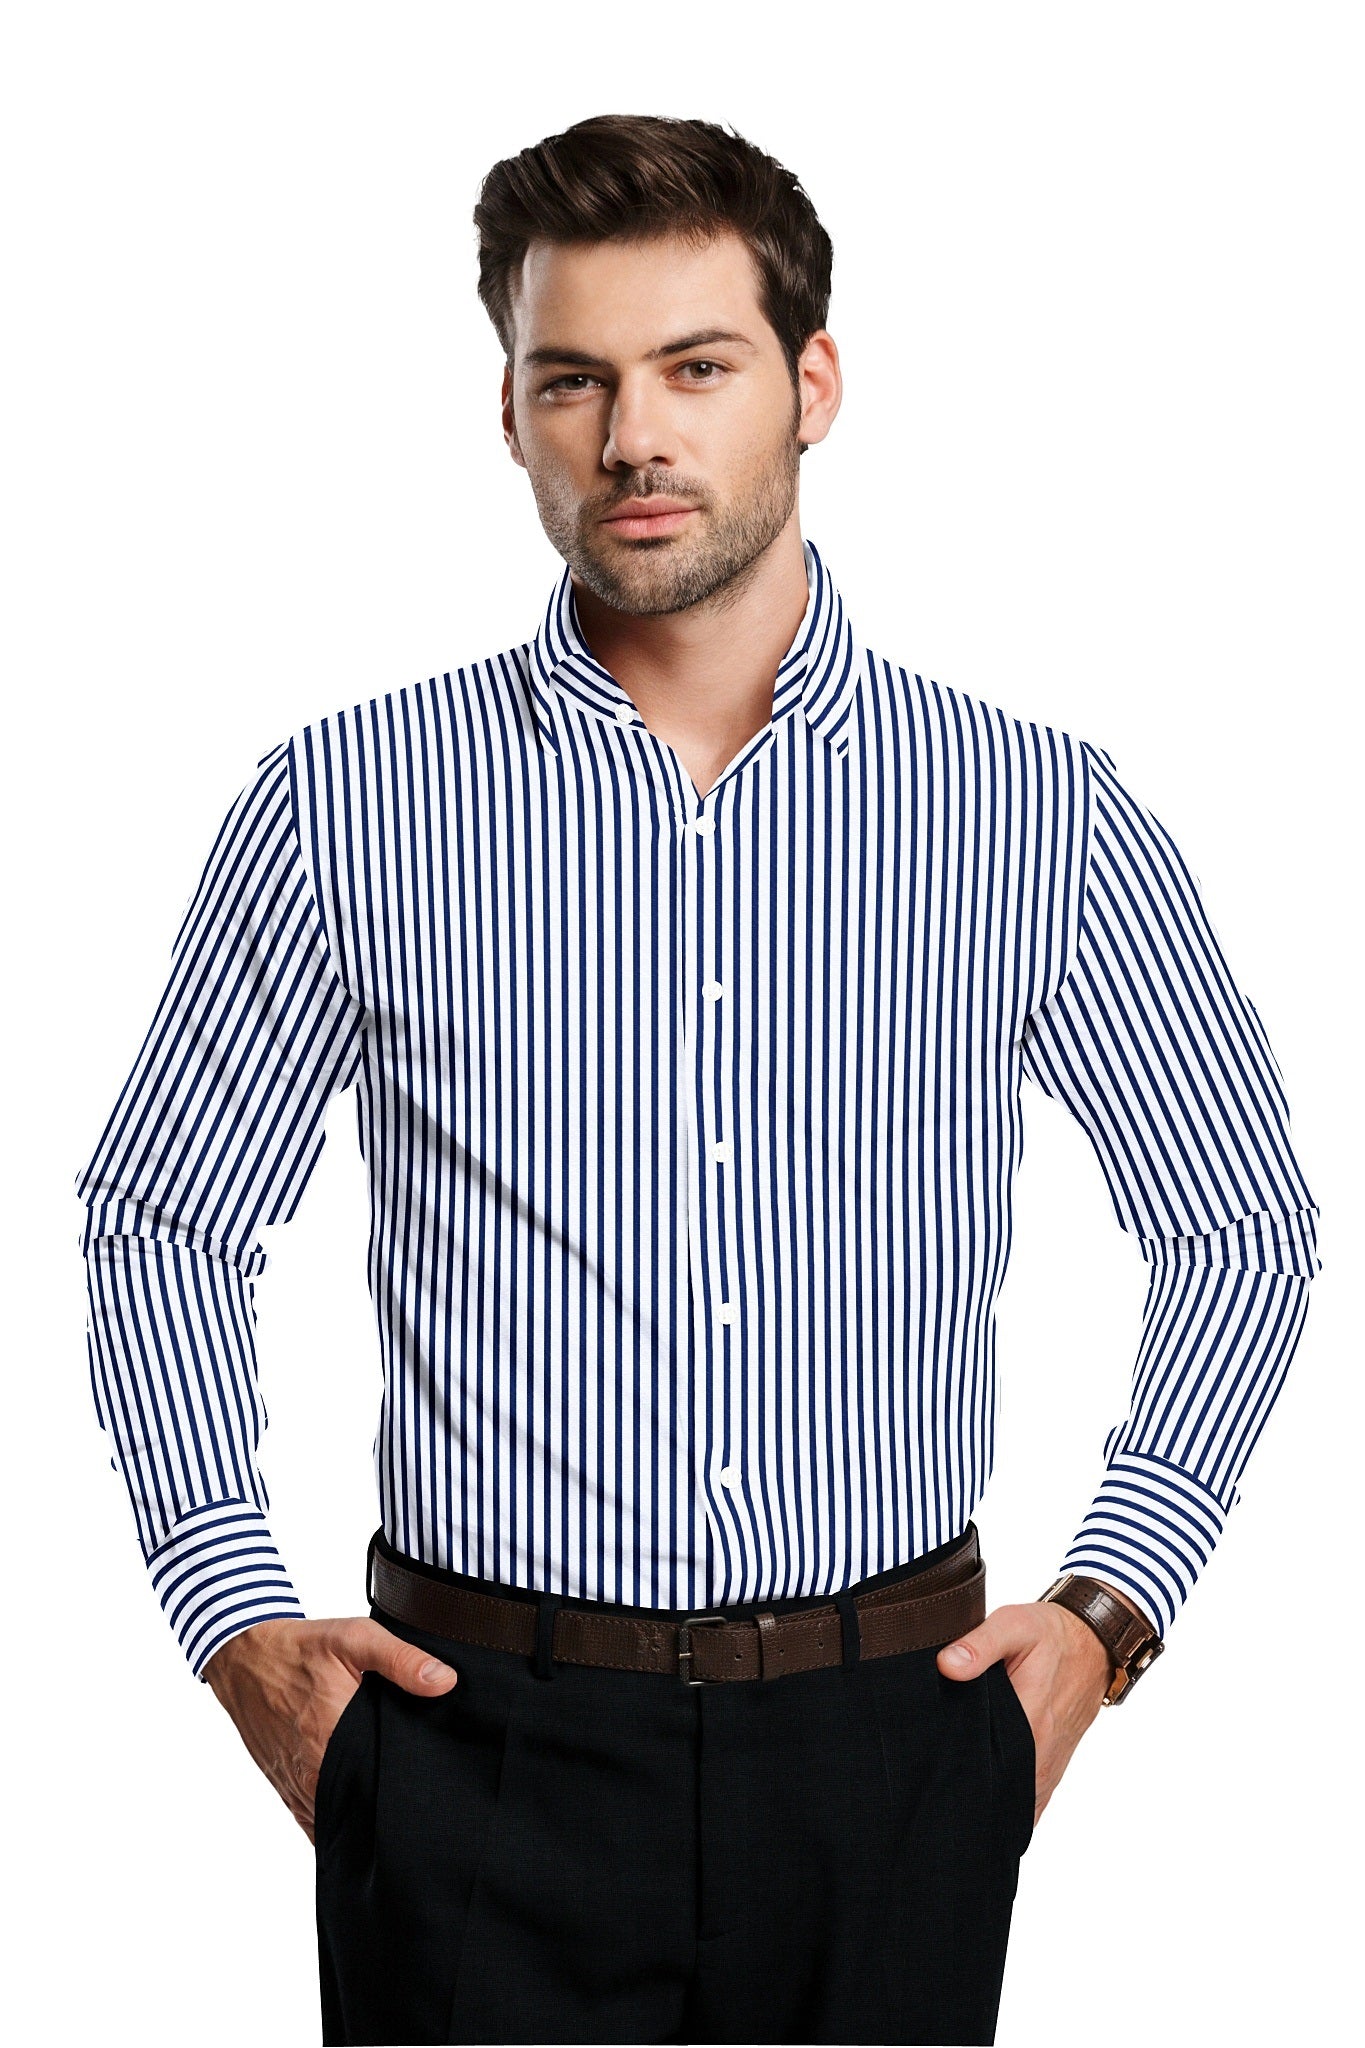 White and Victoria Blue Candy Stripes Cotton Shirt